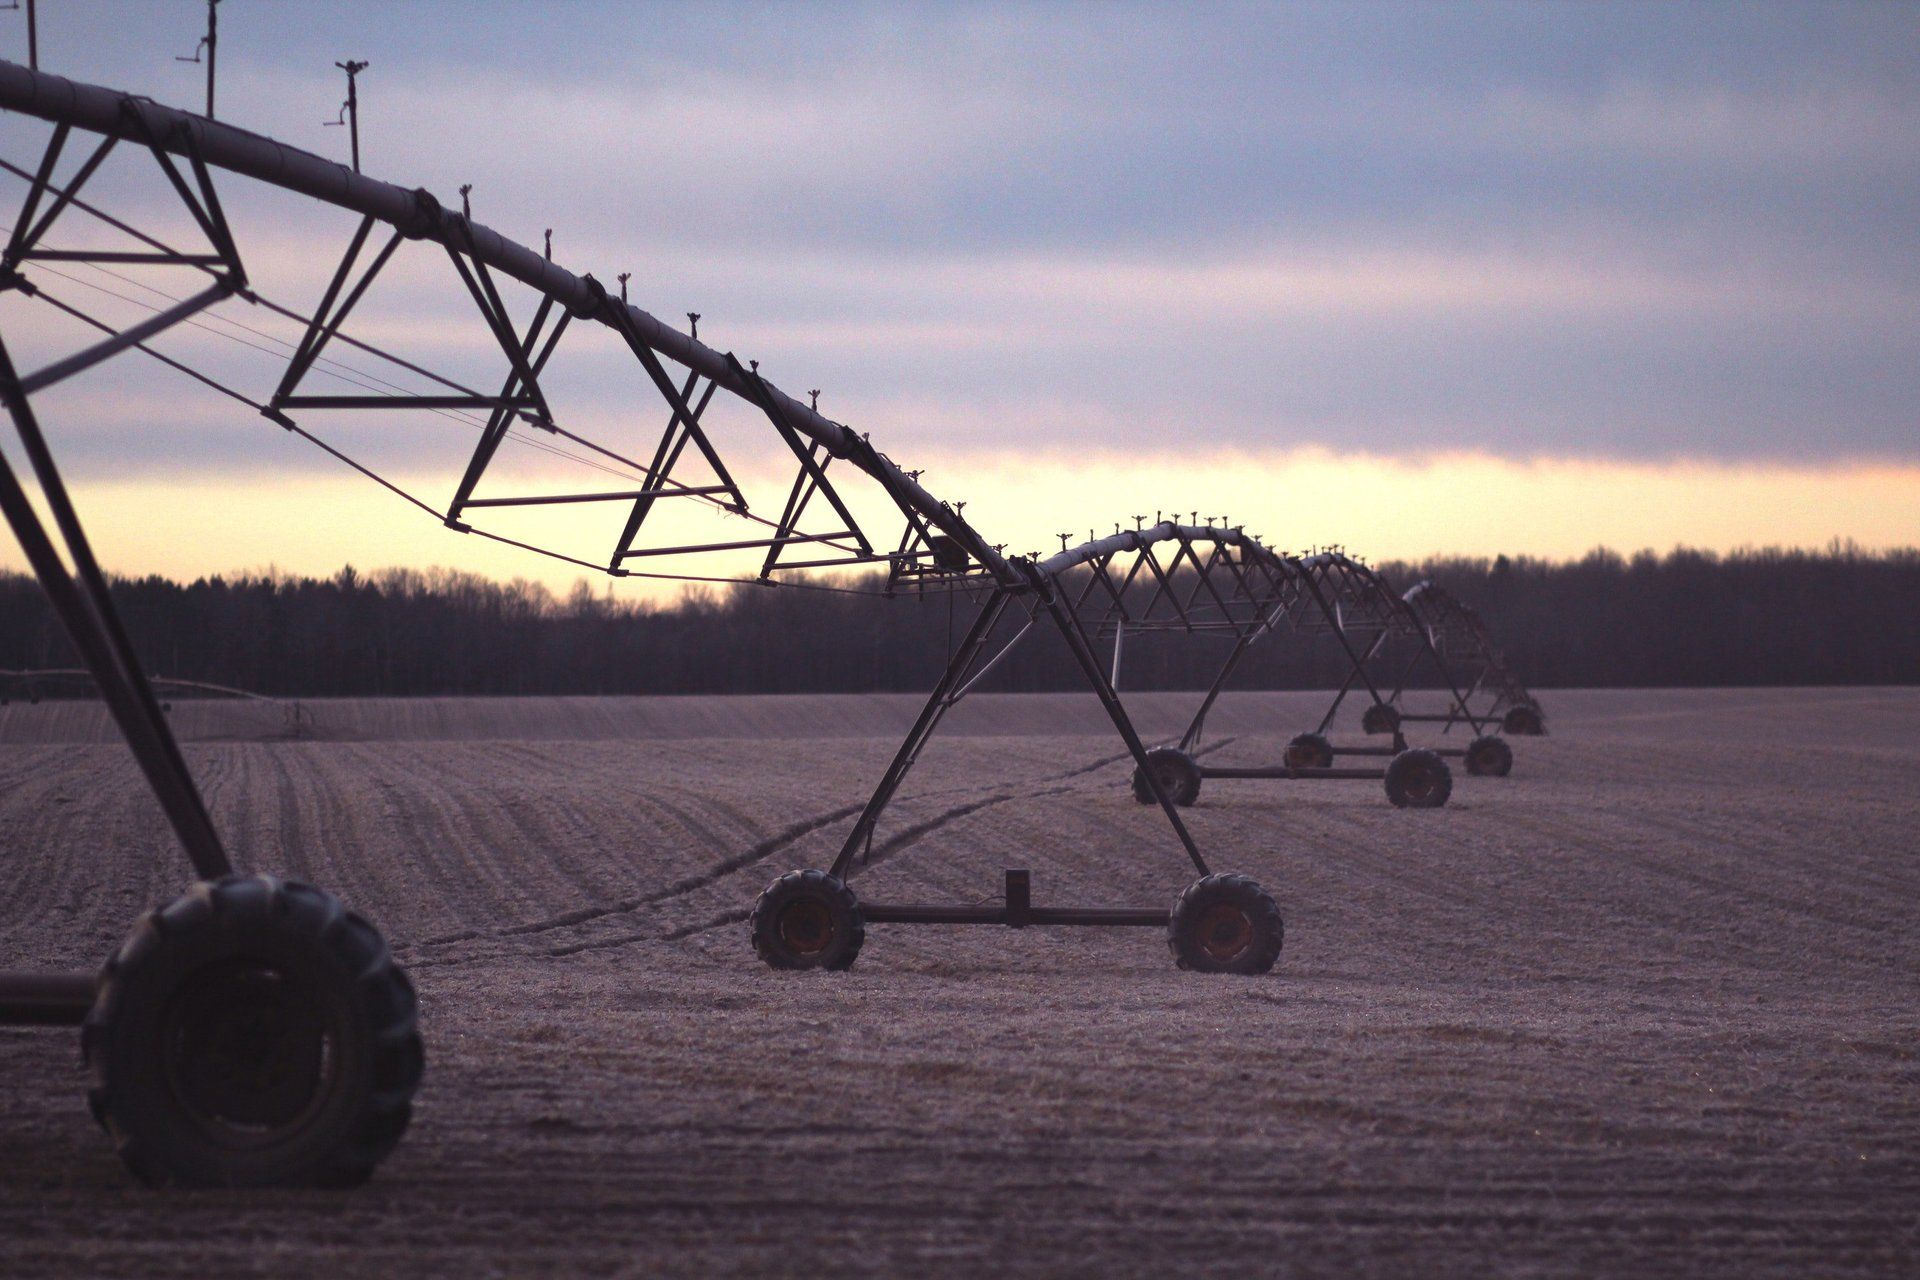 a row of irrigation equipment in a field at sunset